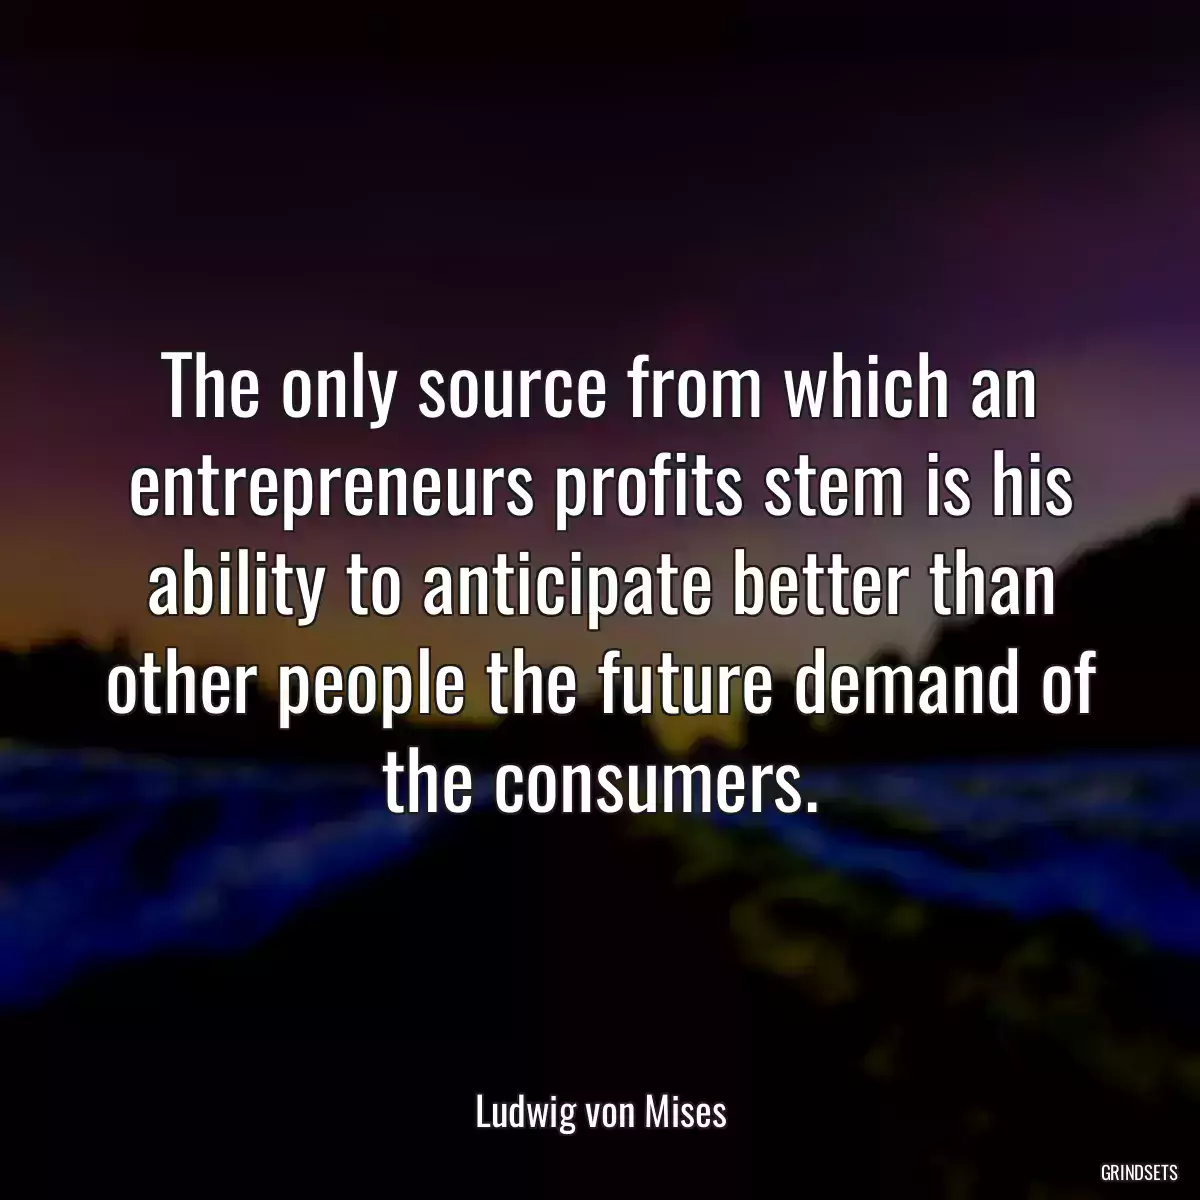 The only source from which an entrepreneurs profits stem is his ability to anticipate better than other people the future demand of the consumers.